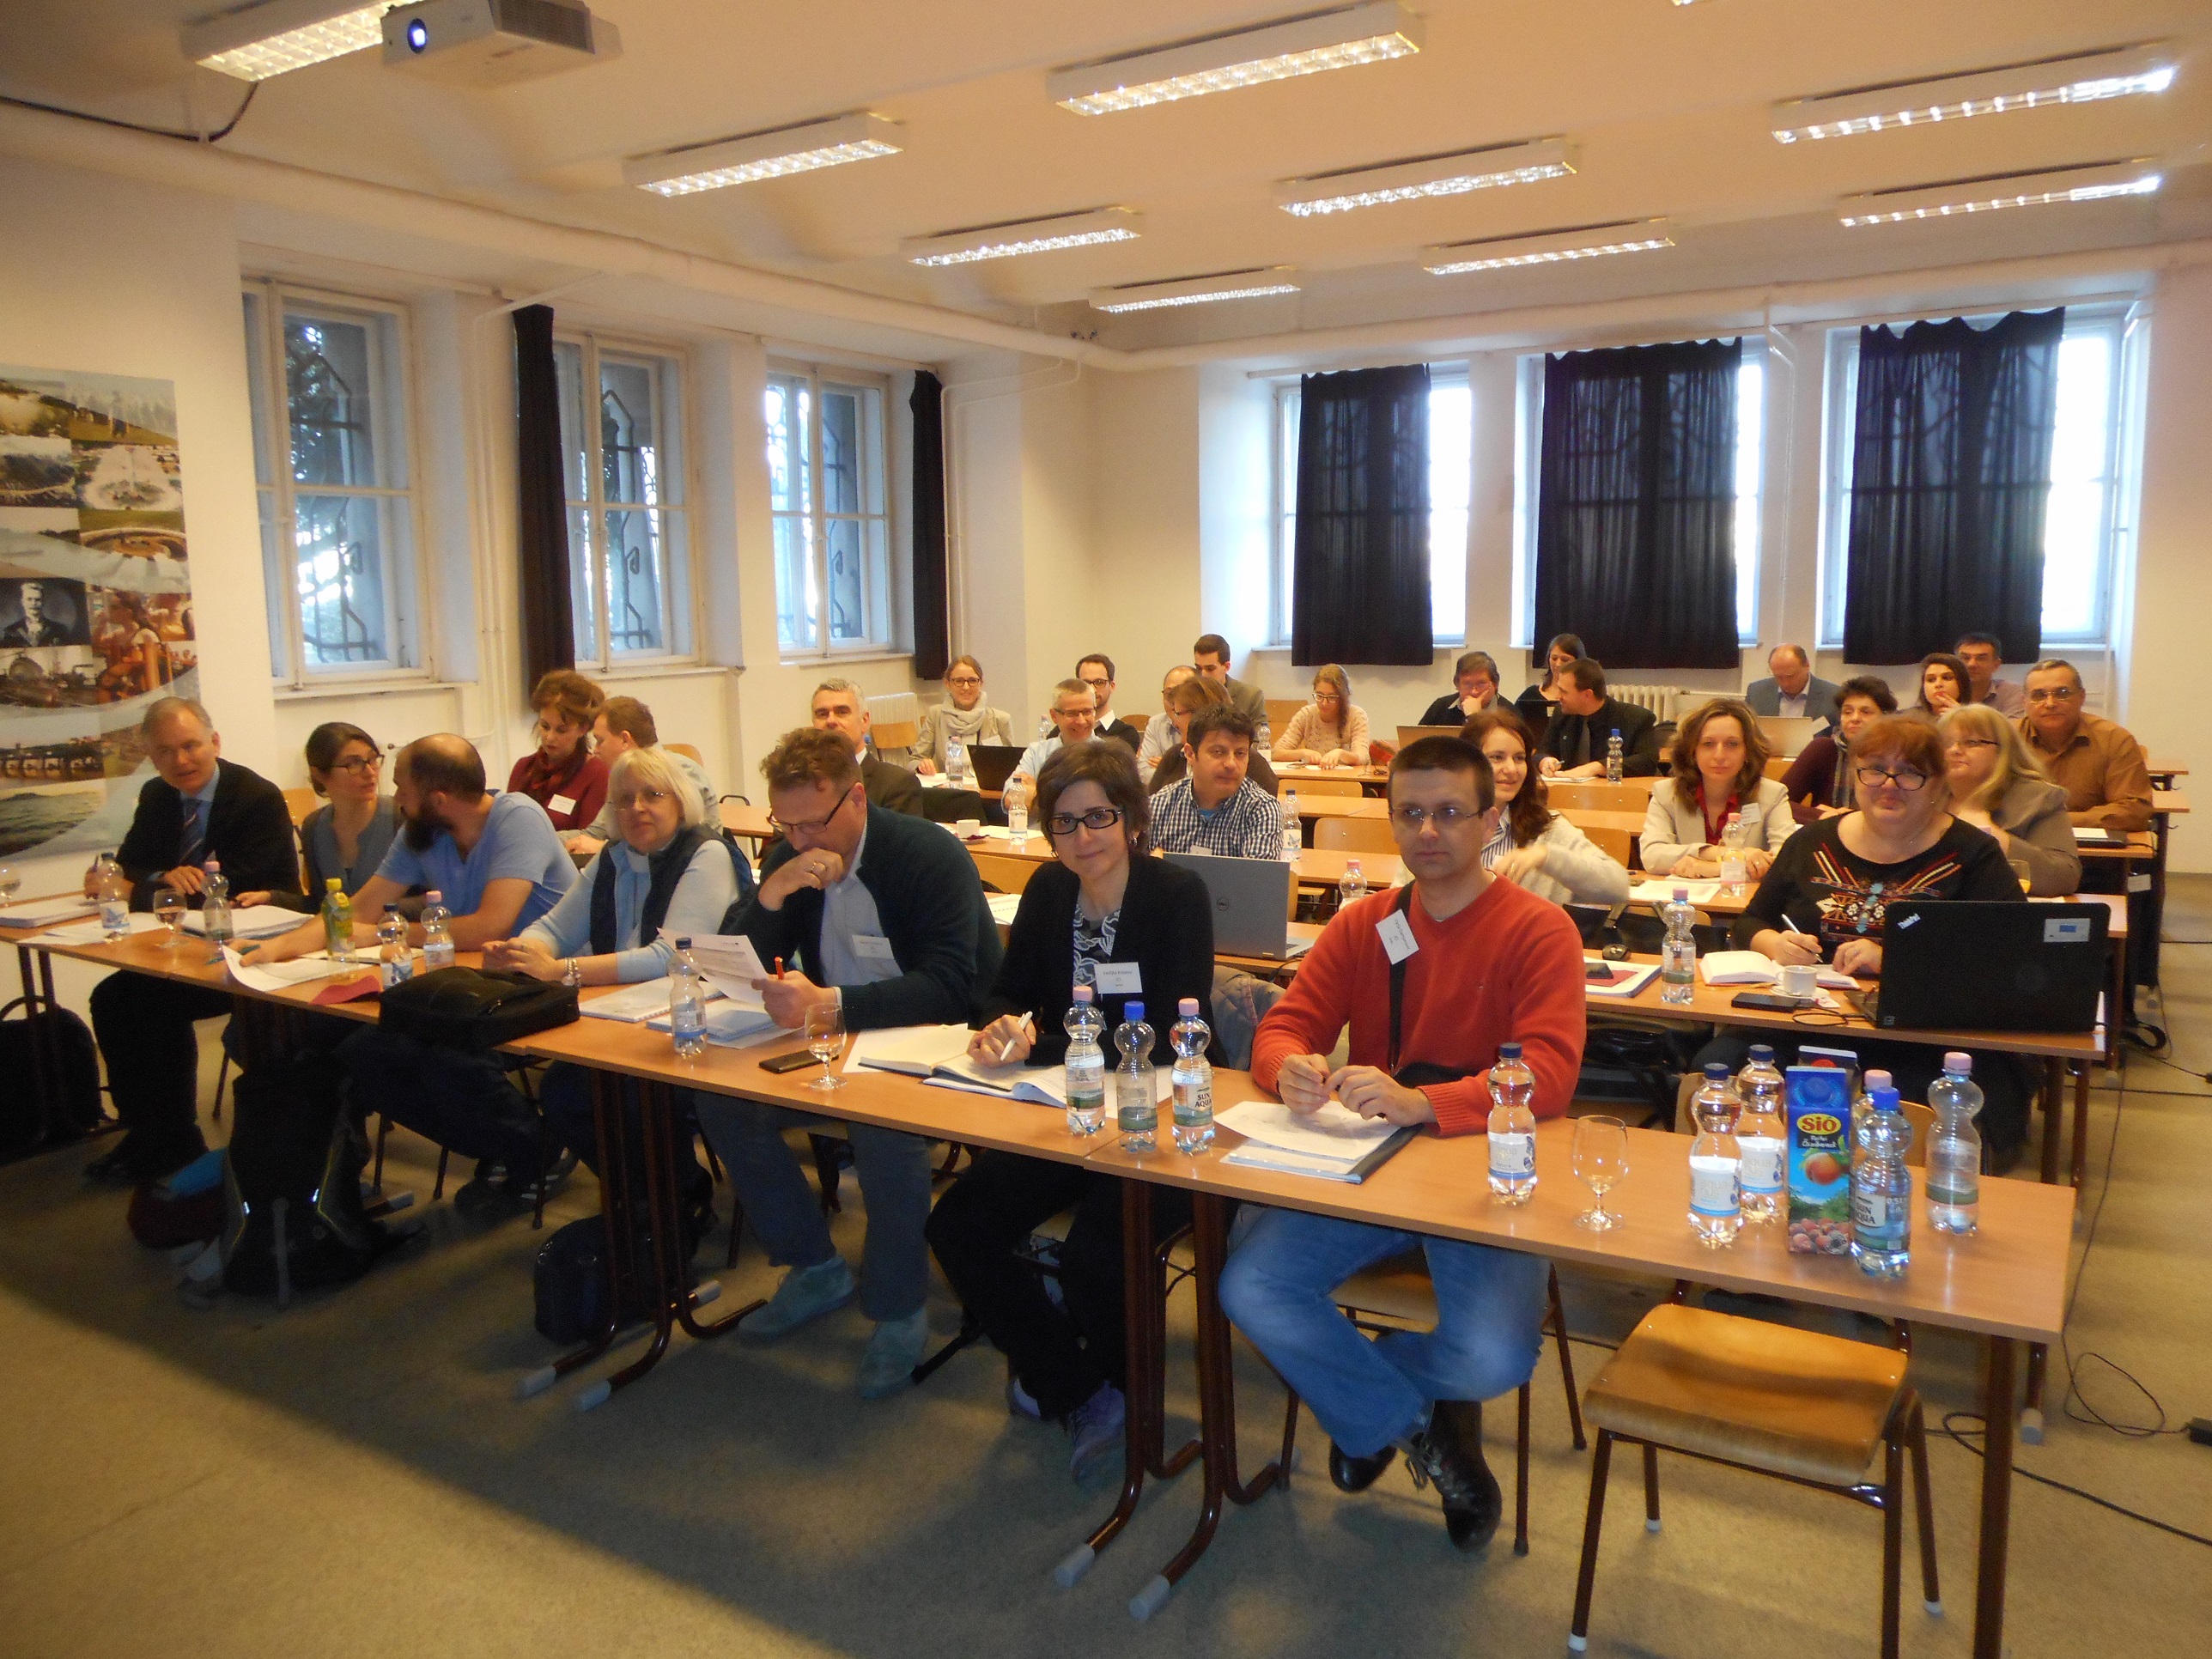 Seminar room full of people at the DanubeSediment Kick-Off Meeting in March in Budapest